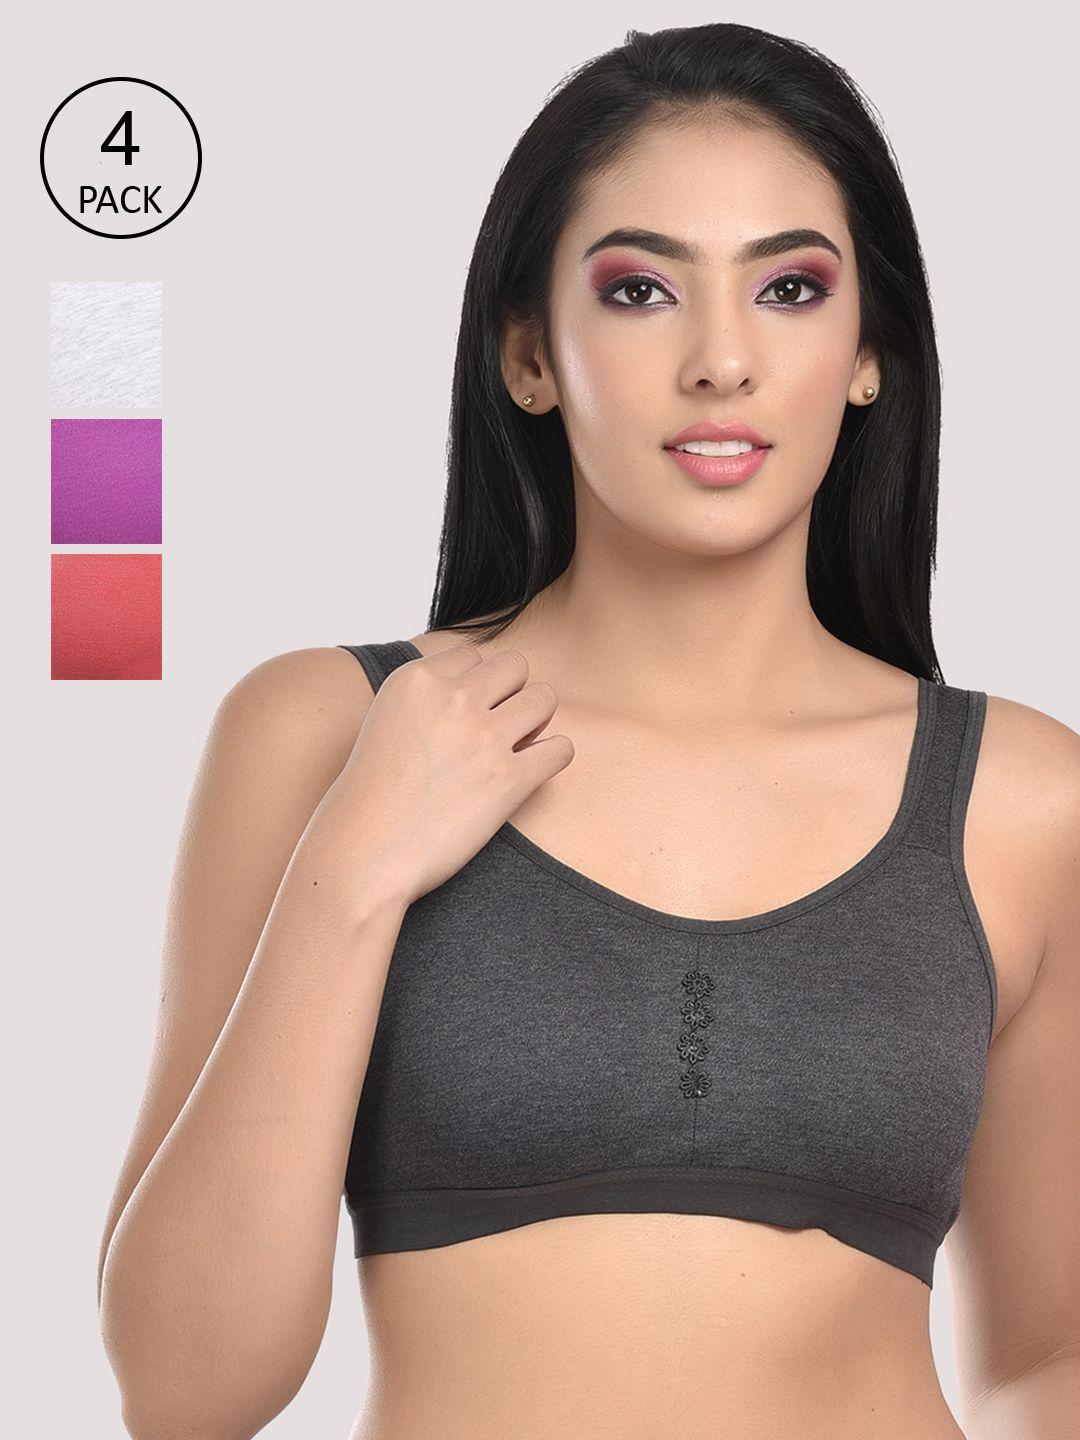 styfun women black and grey and red and purple bra